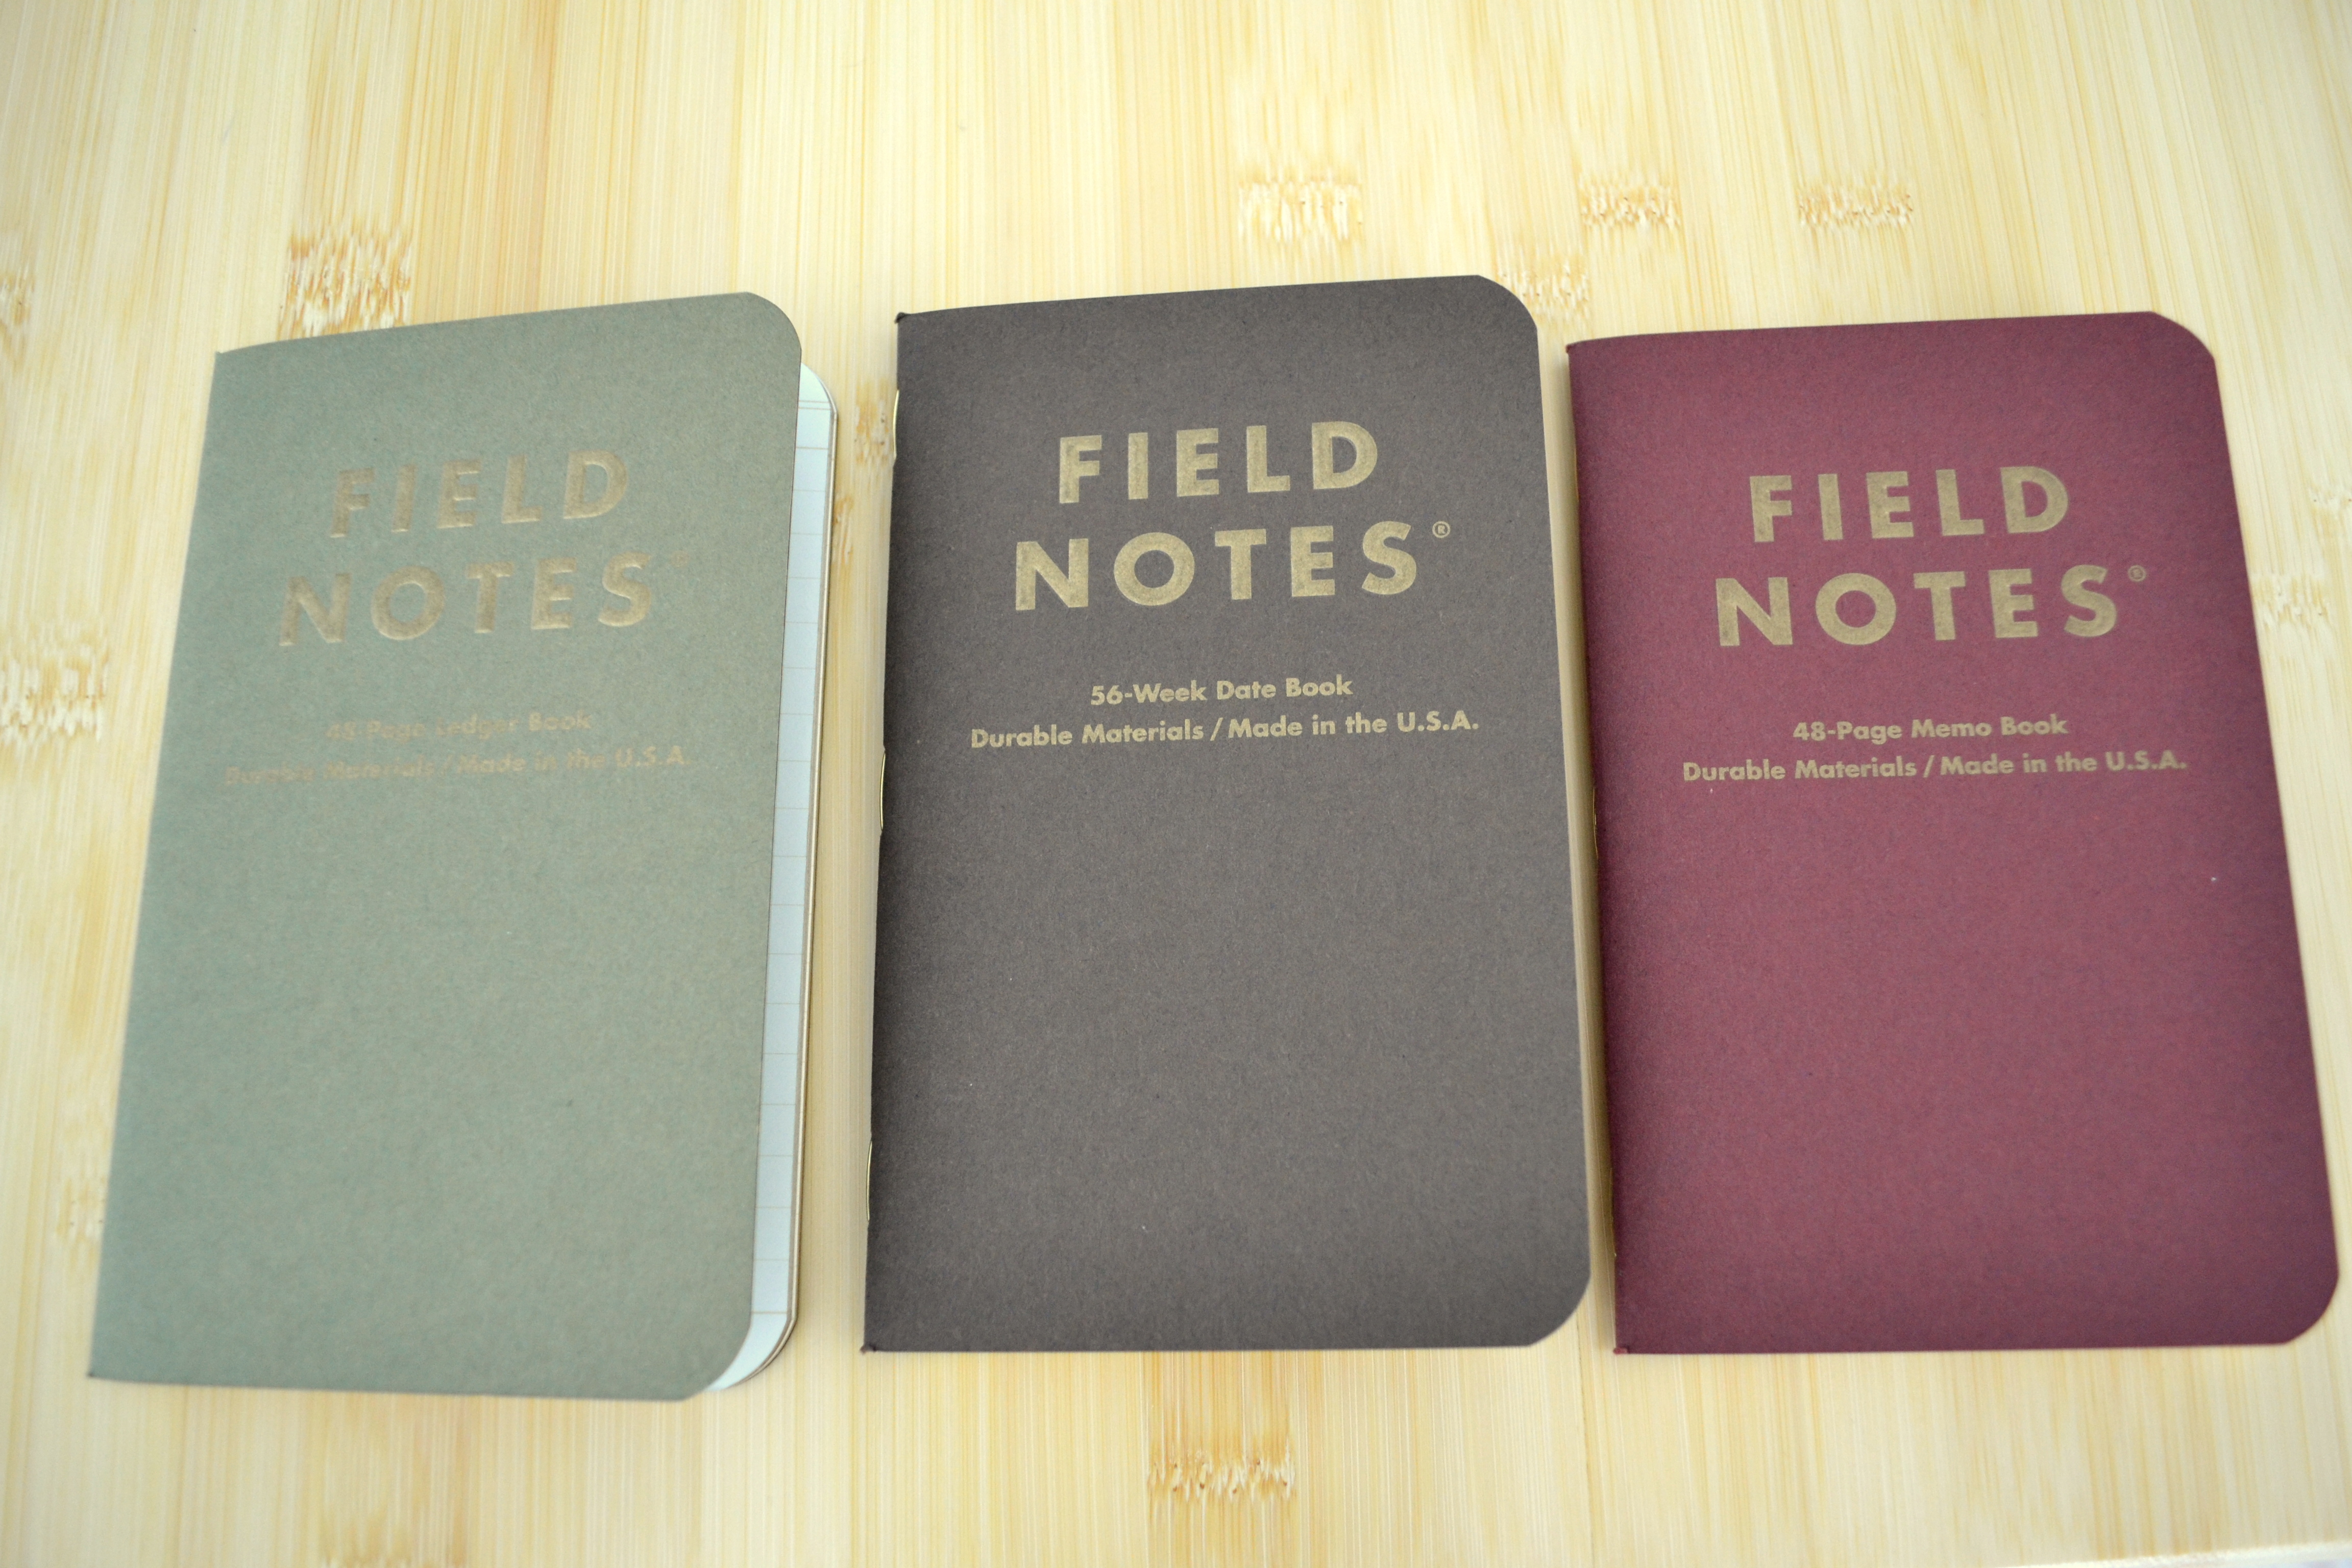 Field Notes Ambition